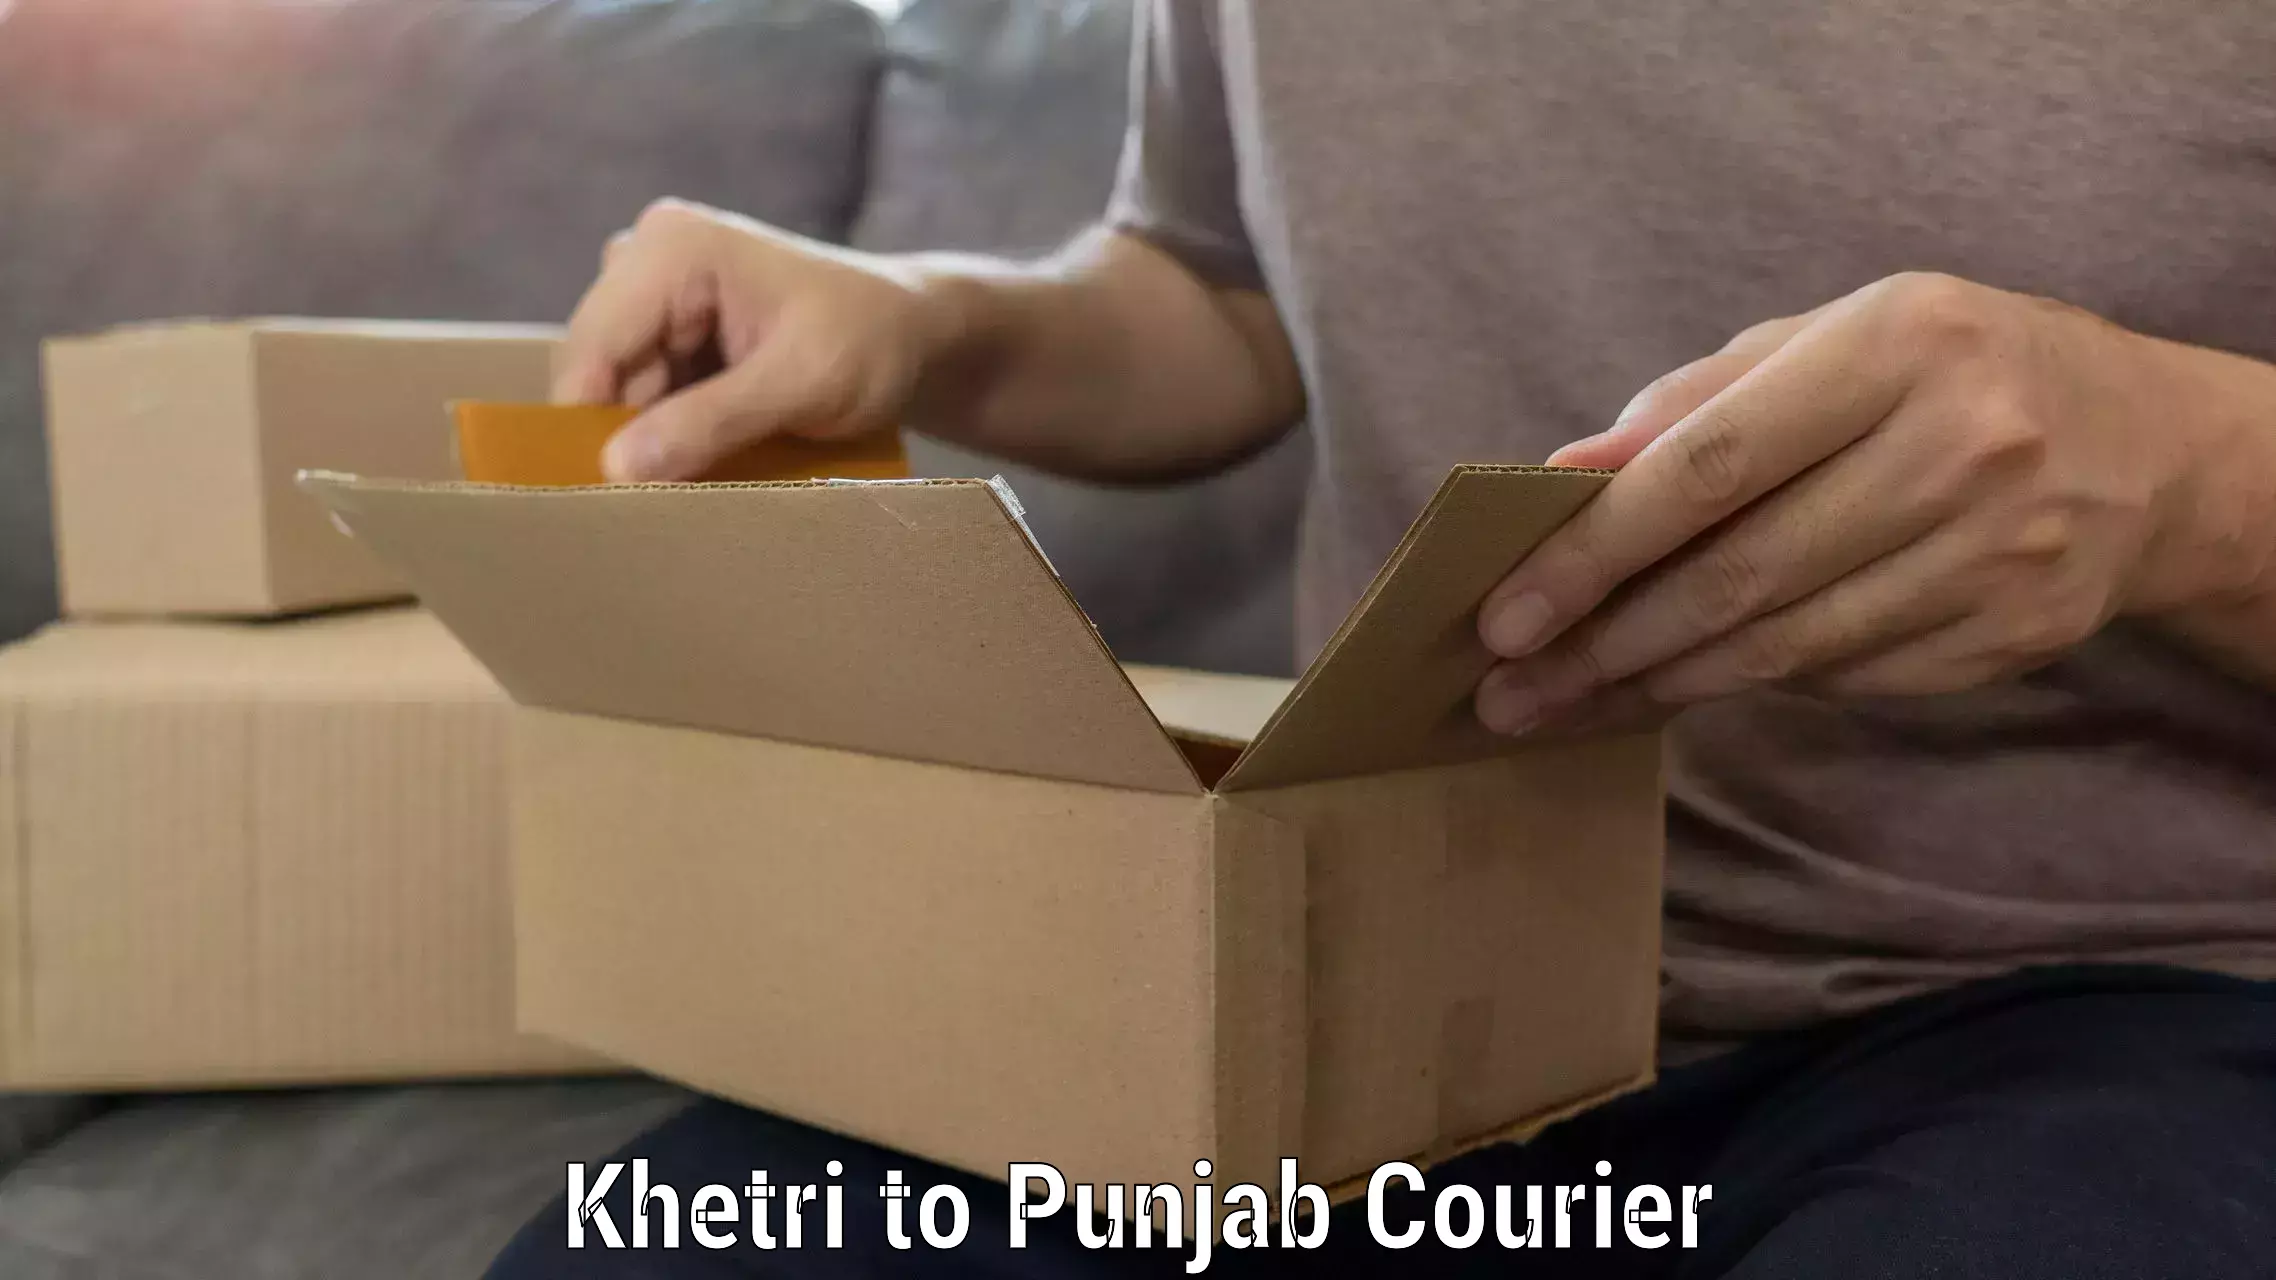 Affordable relocation services Khetri to Mohali